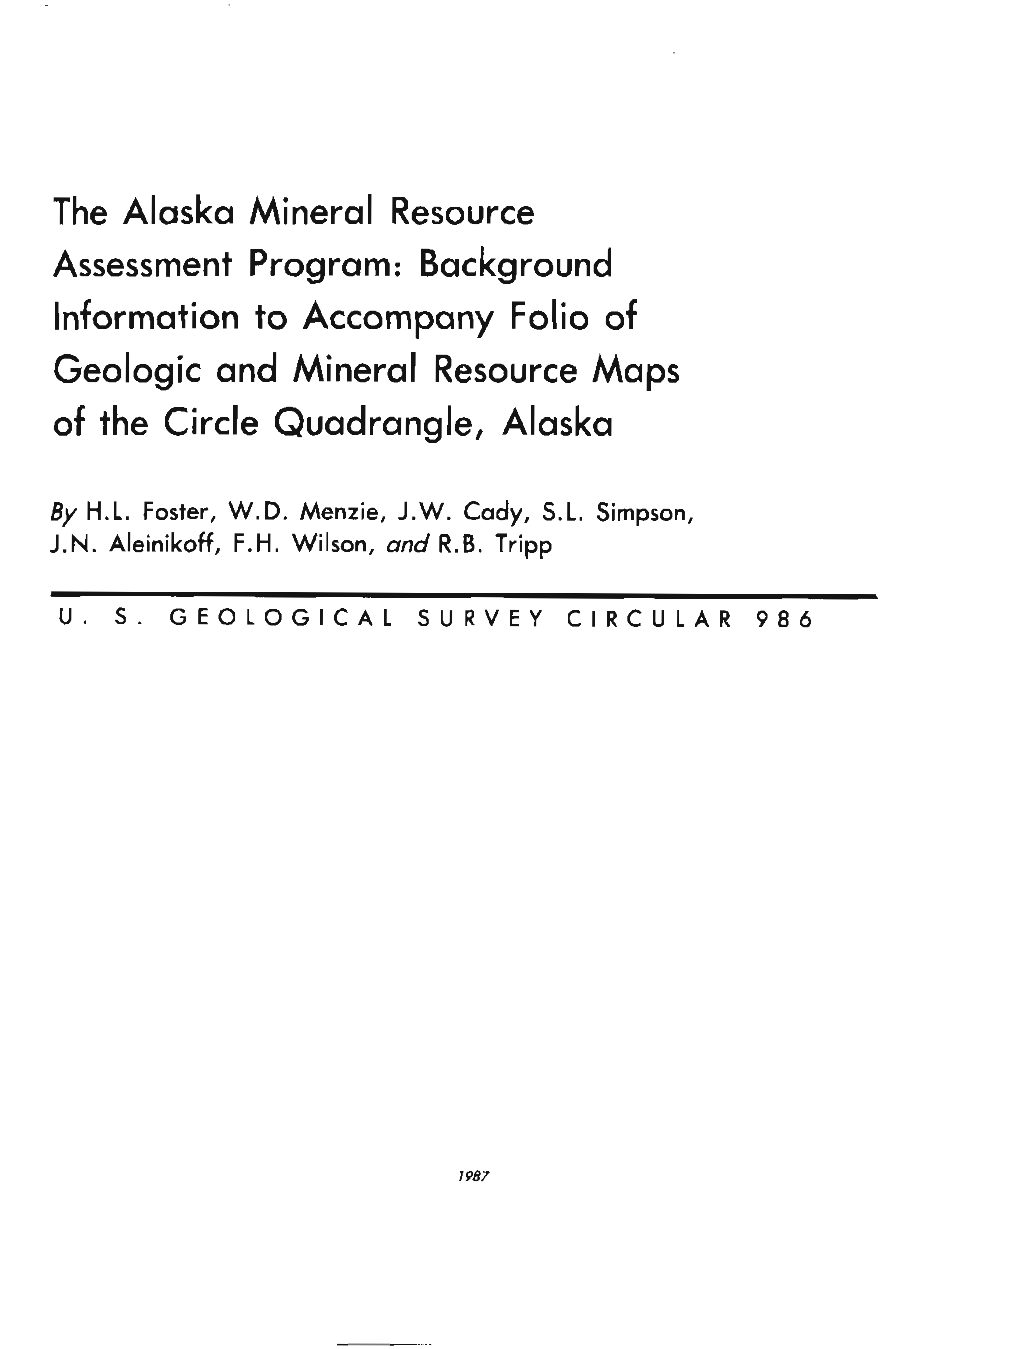 The Alaska Mineral Resource Assessment Program: Background Information to Accompany Folio of Geologic and Mineral Resource Maps of the Circle Quadrangle, Alaska